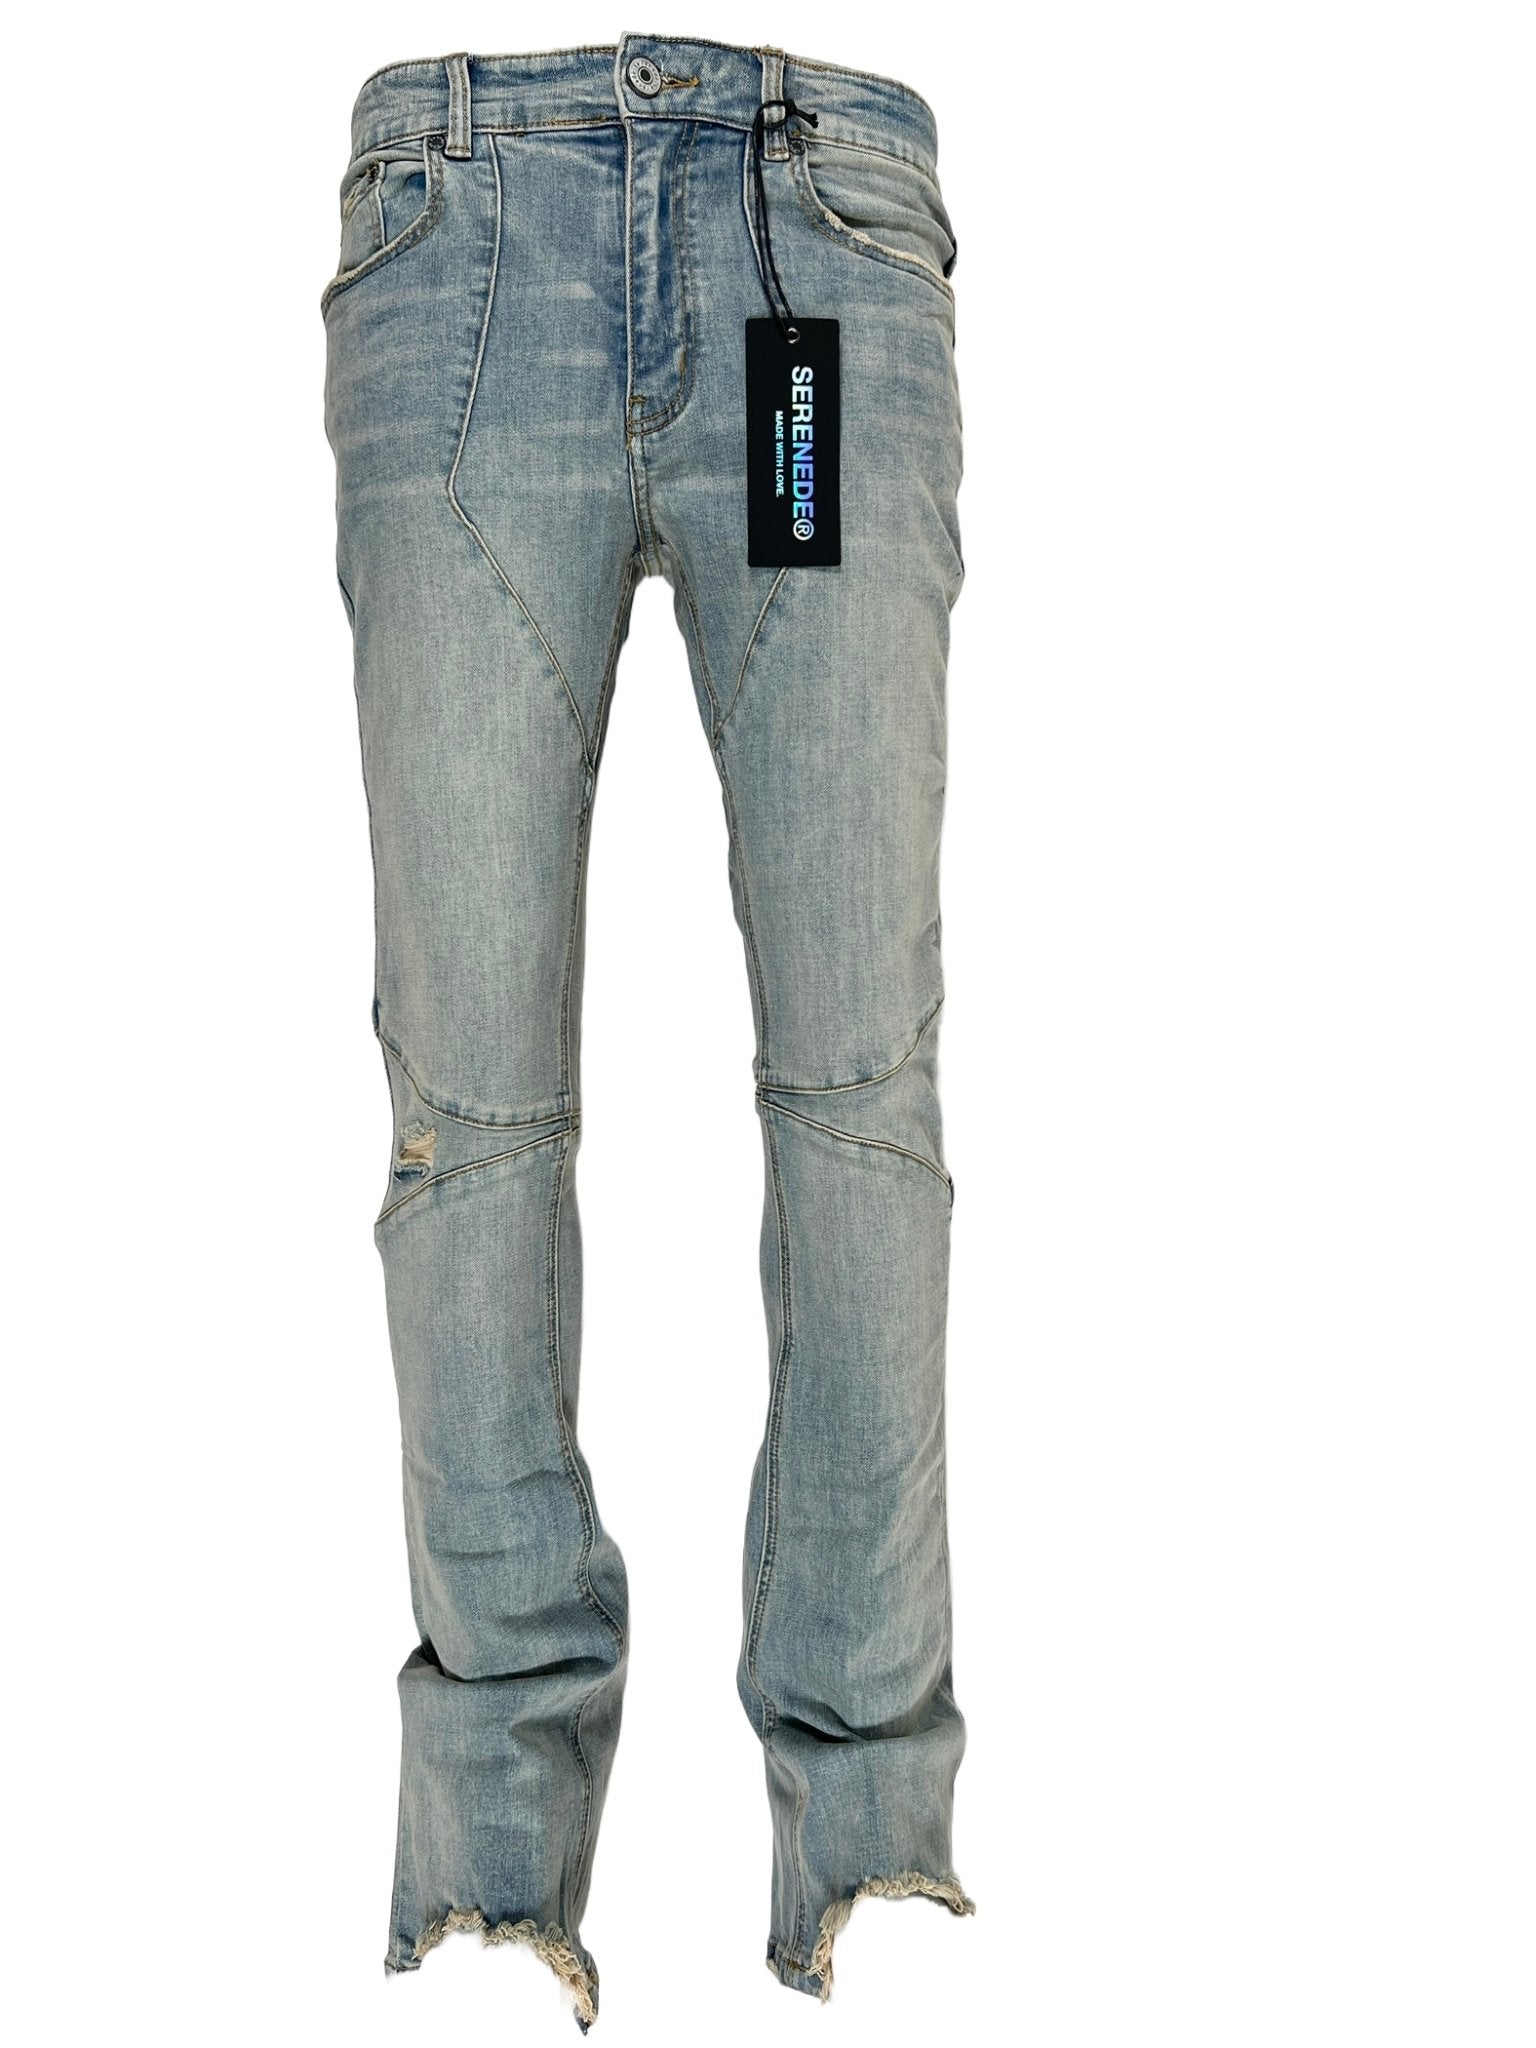 SERENEDE BRONZE STACKED JEANS EARTH - Probus